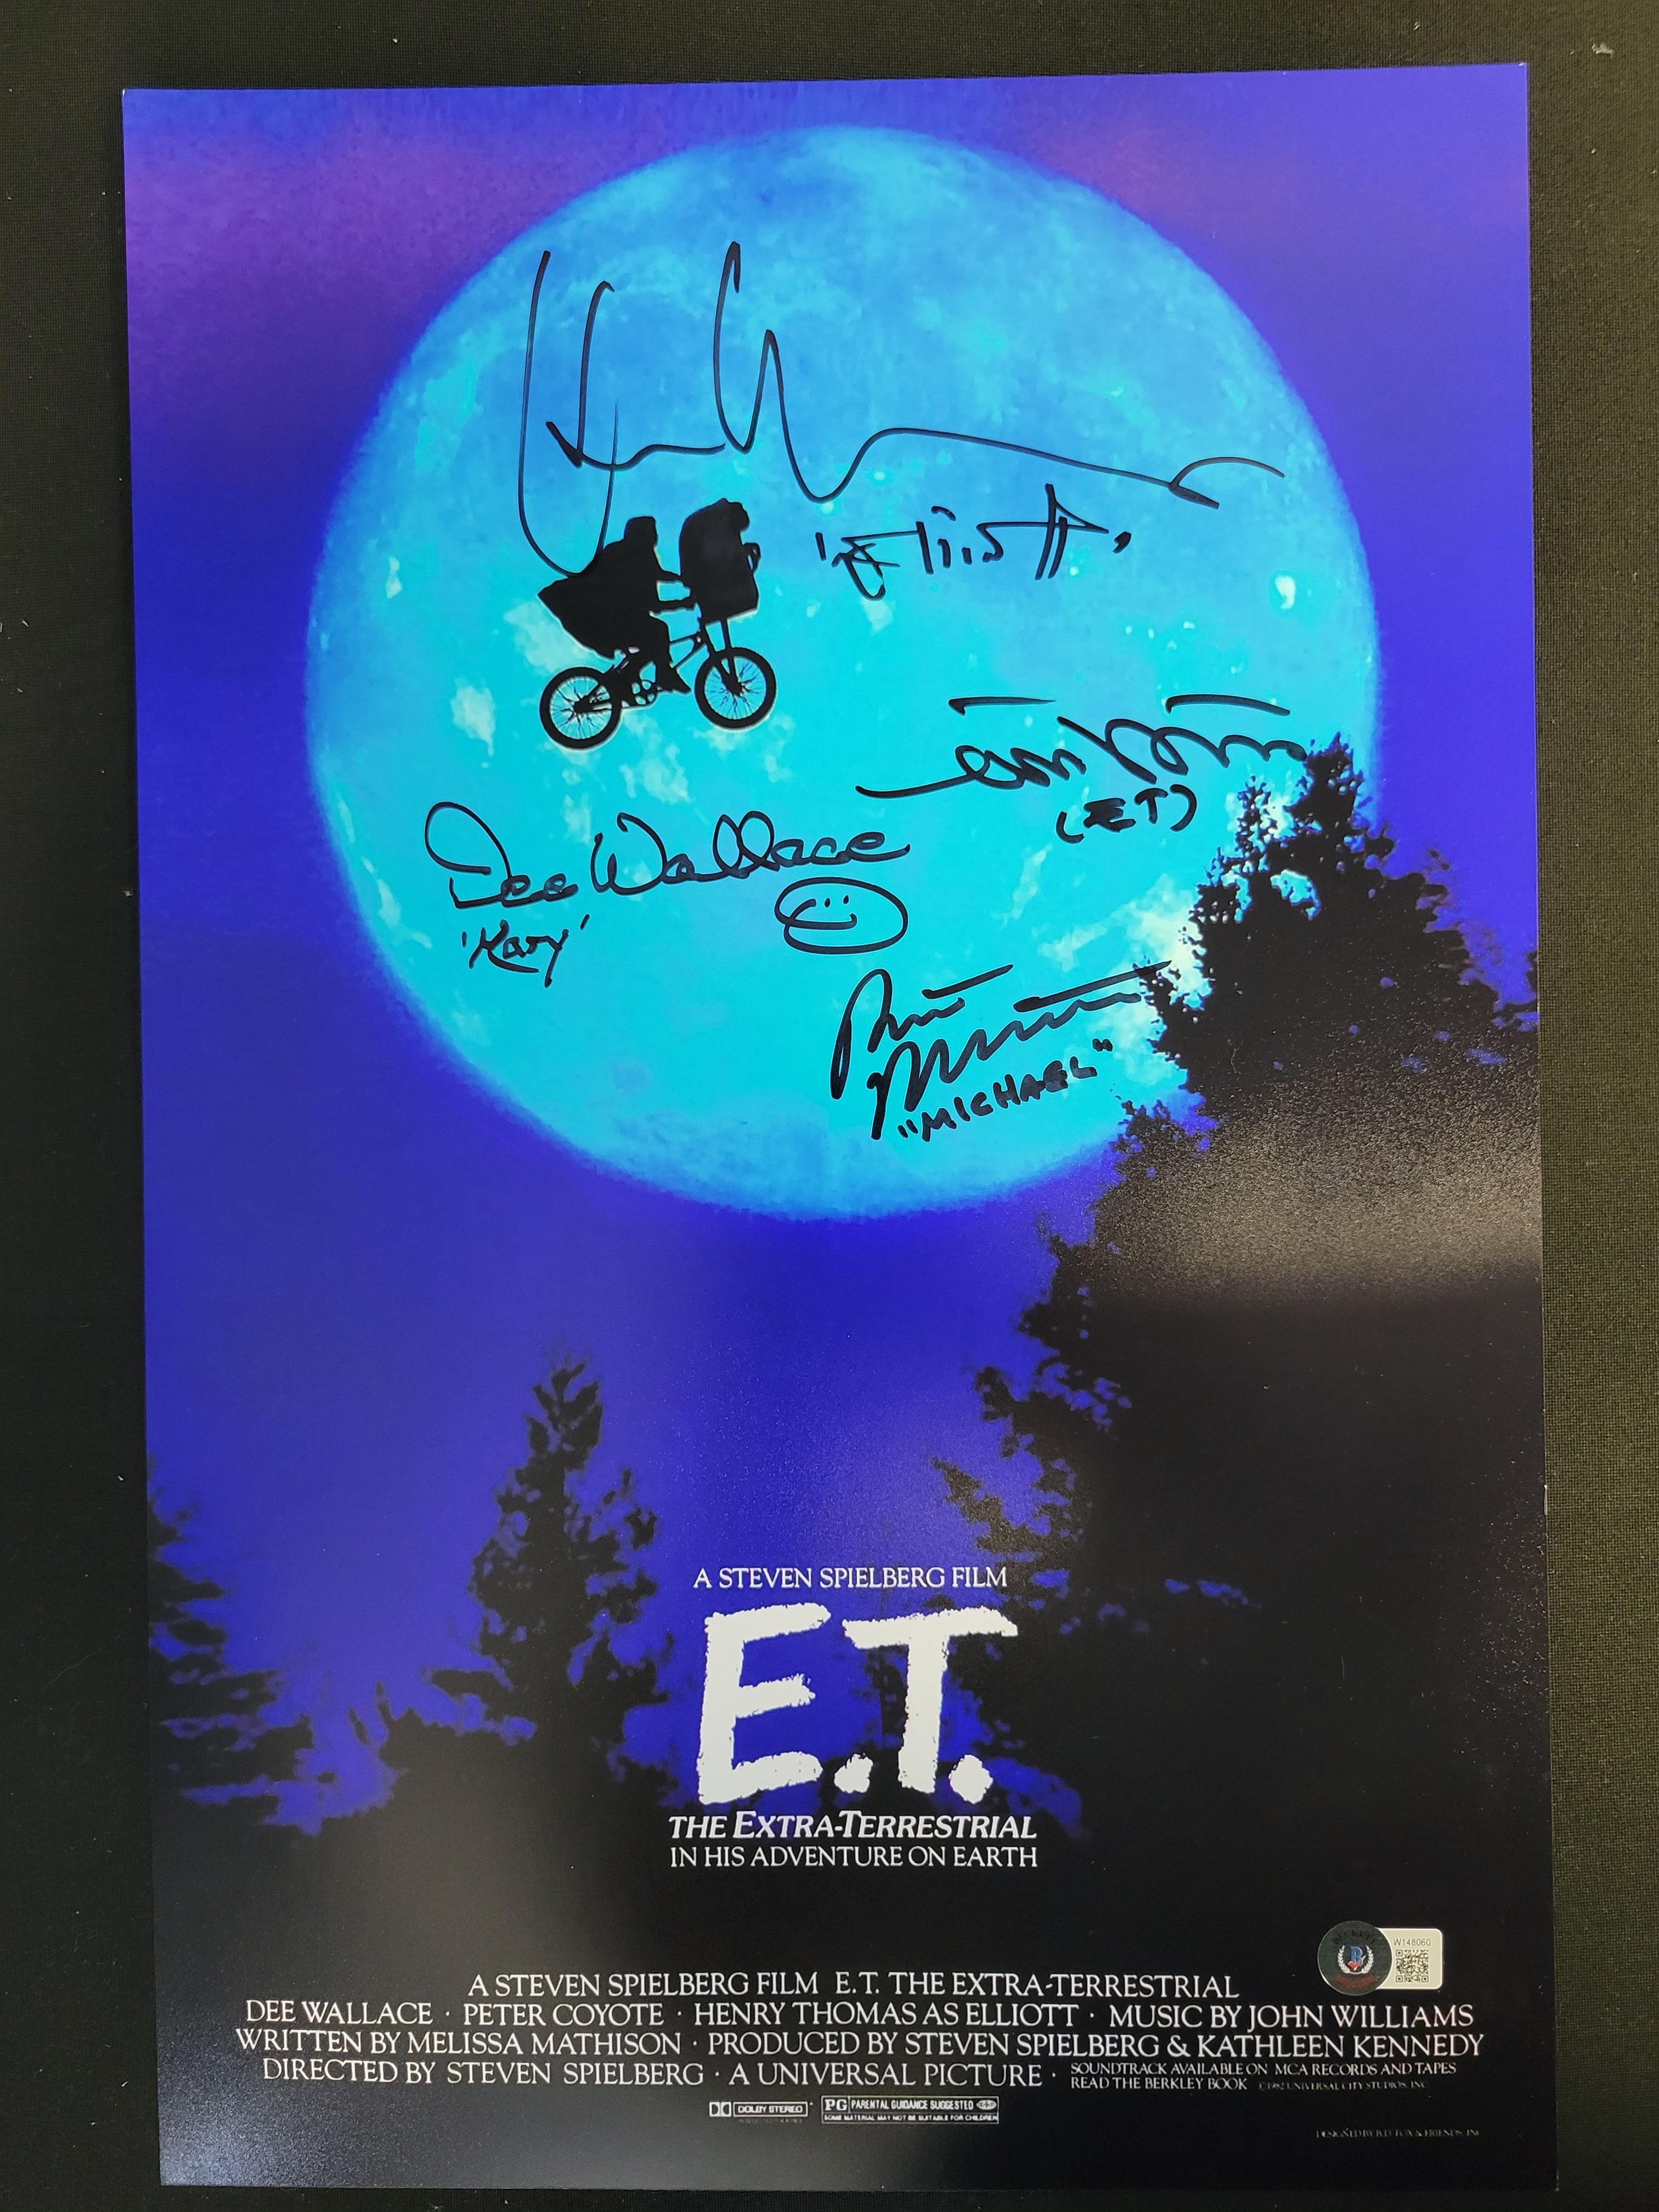 12 "x 18" E.T. Mini Poster with Autographs of 4 Major Cast Members